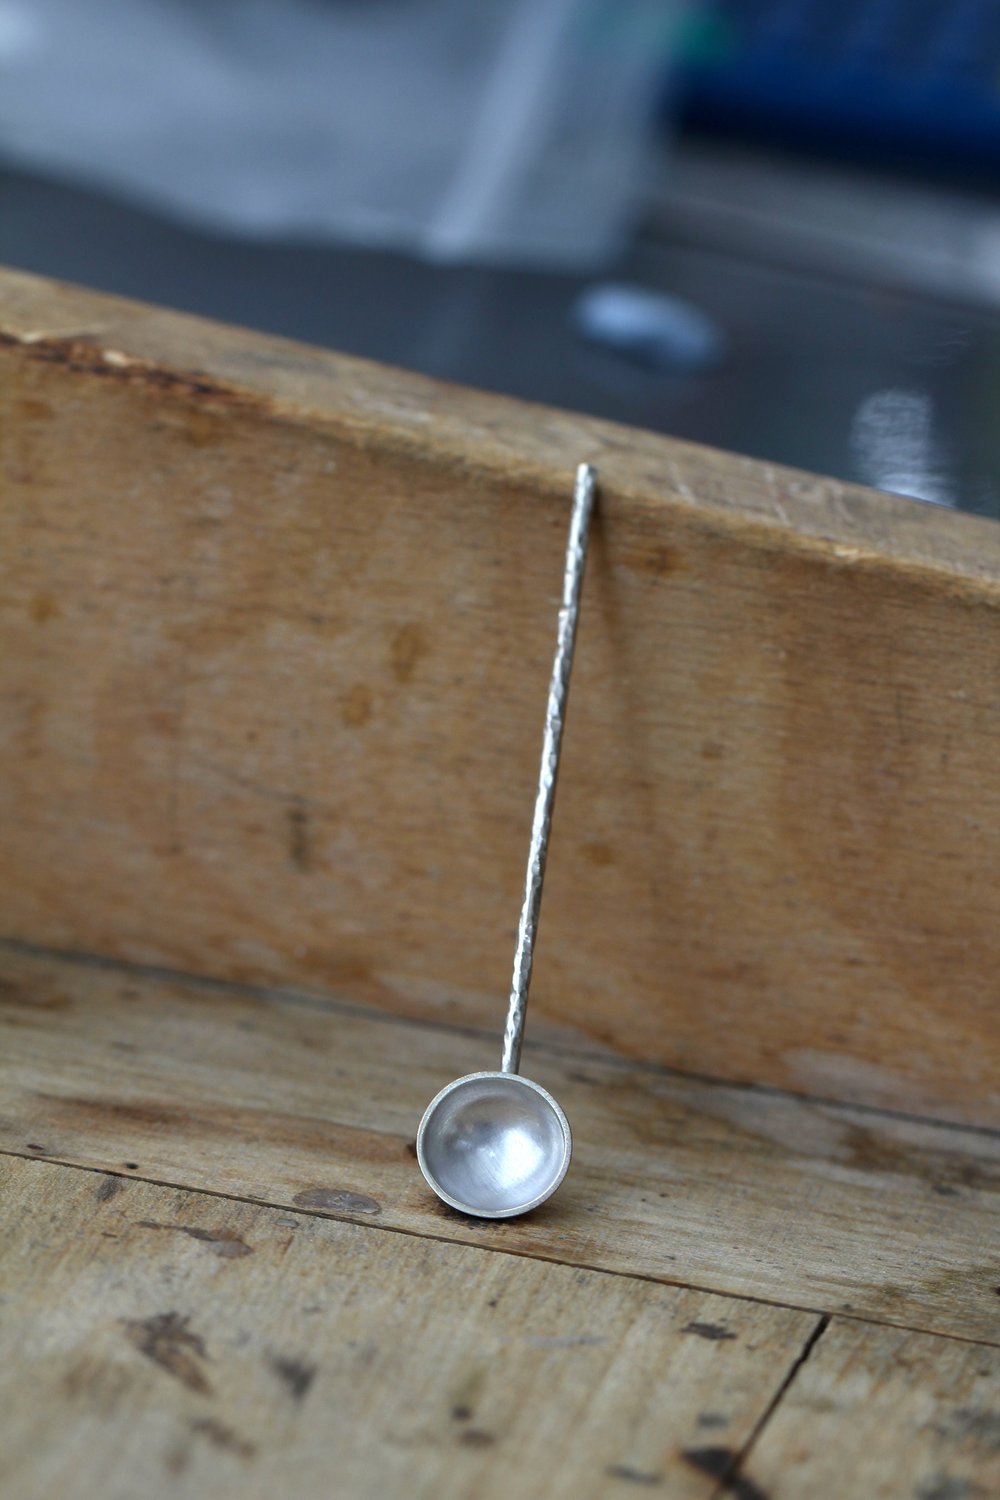 Image of RR Designs Sterling Silver Spoon #2 with round textured handle - Size Medium